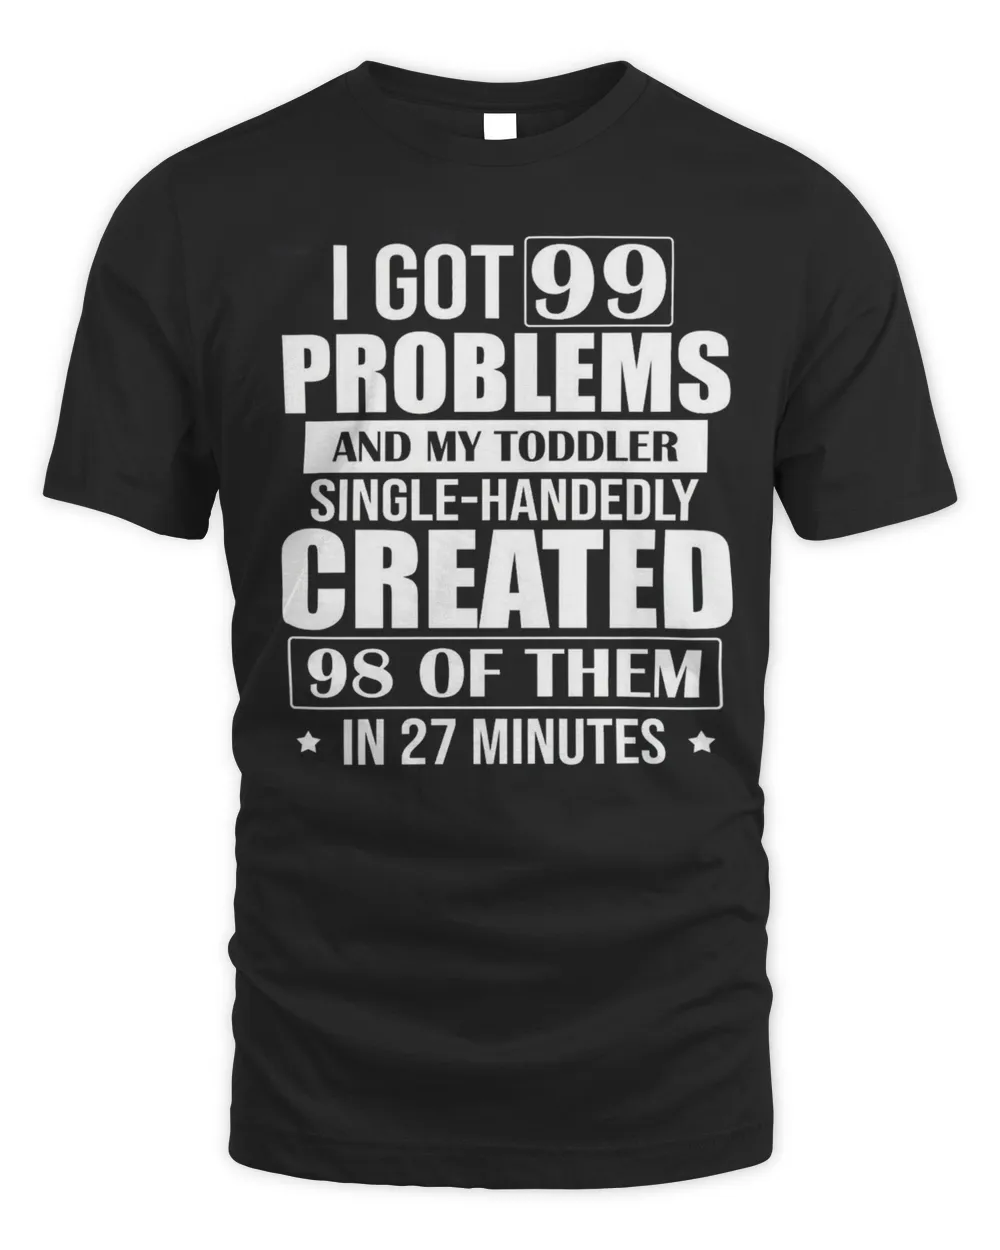 I Got 99 Problems And My Toddler Single-handedly Created 98 Of Them In 27 Minutes Shirt